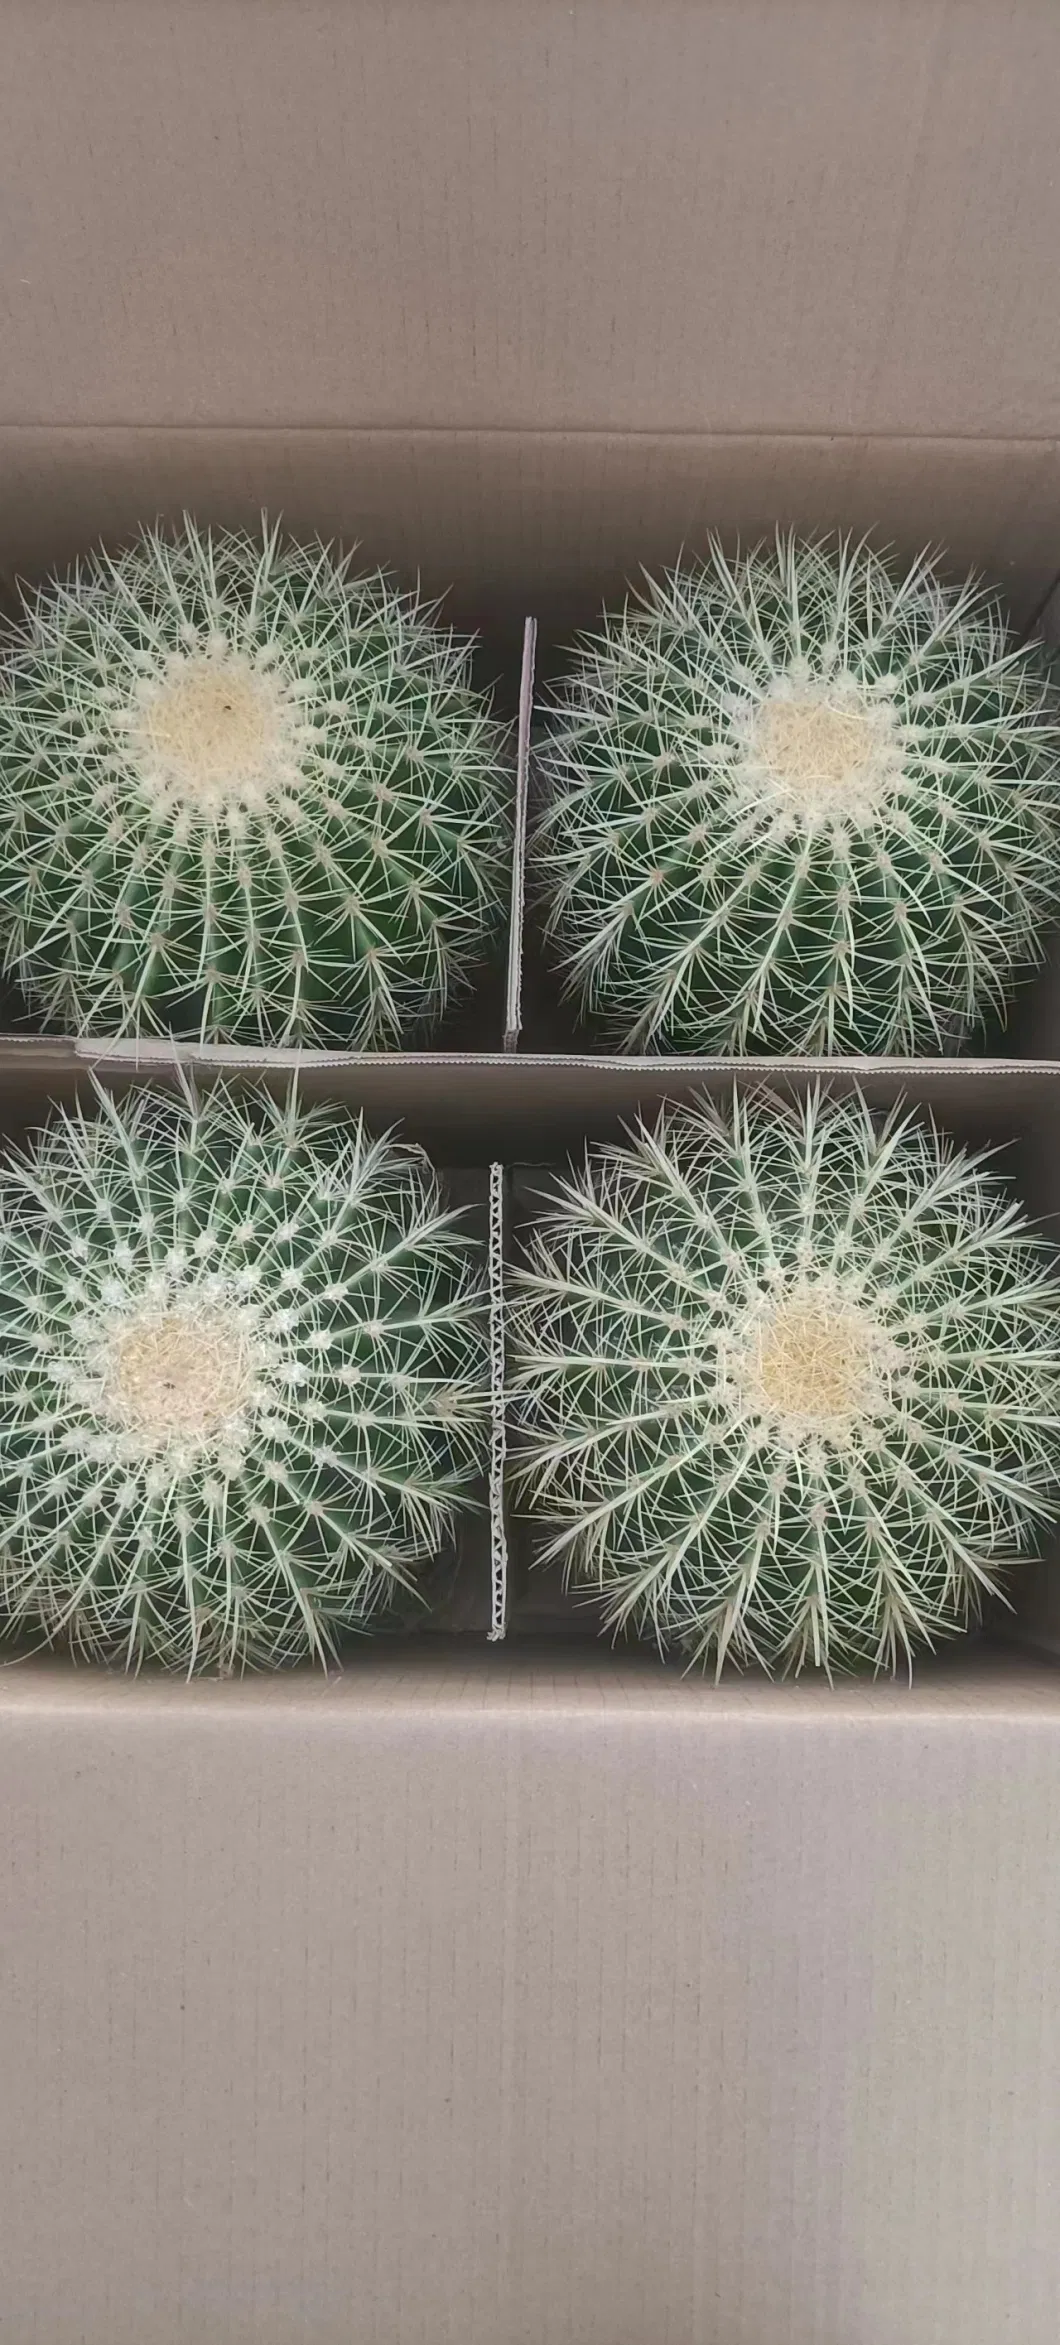 Different Size Live Echinocactus Grusonii Optional Cheap Cactus Wholesales From Farm